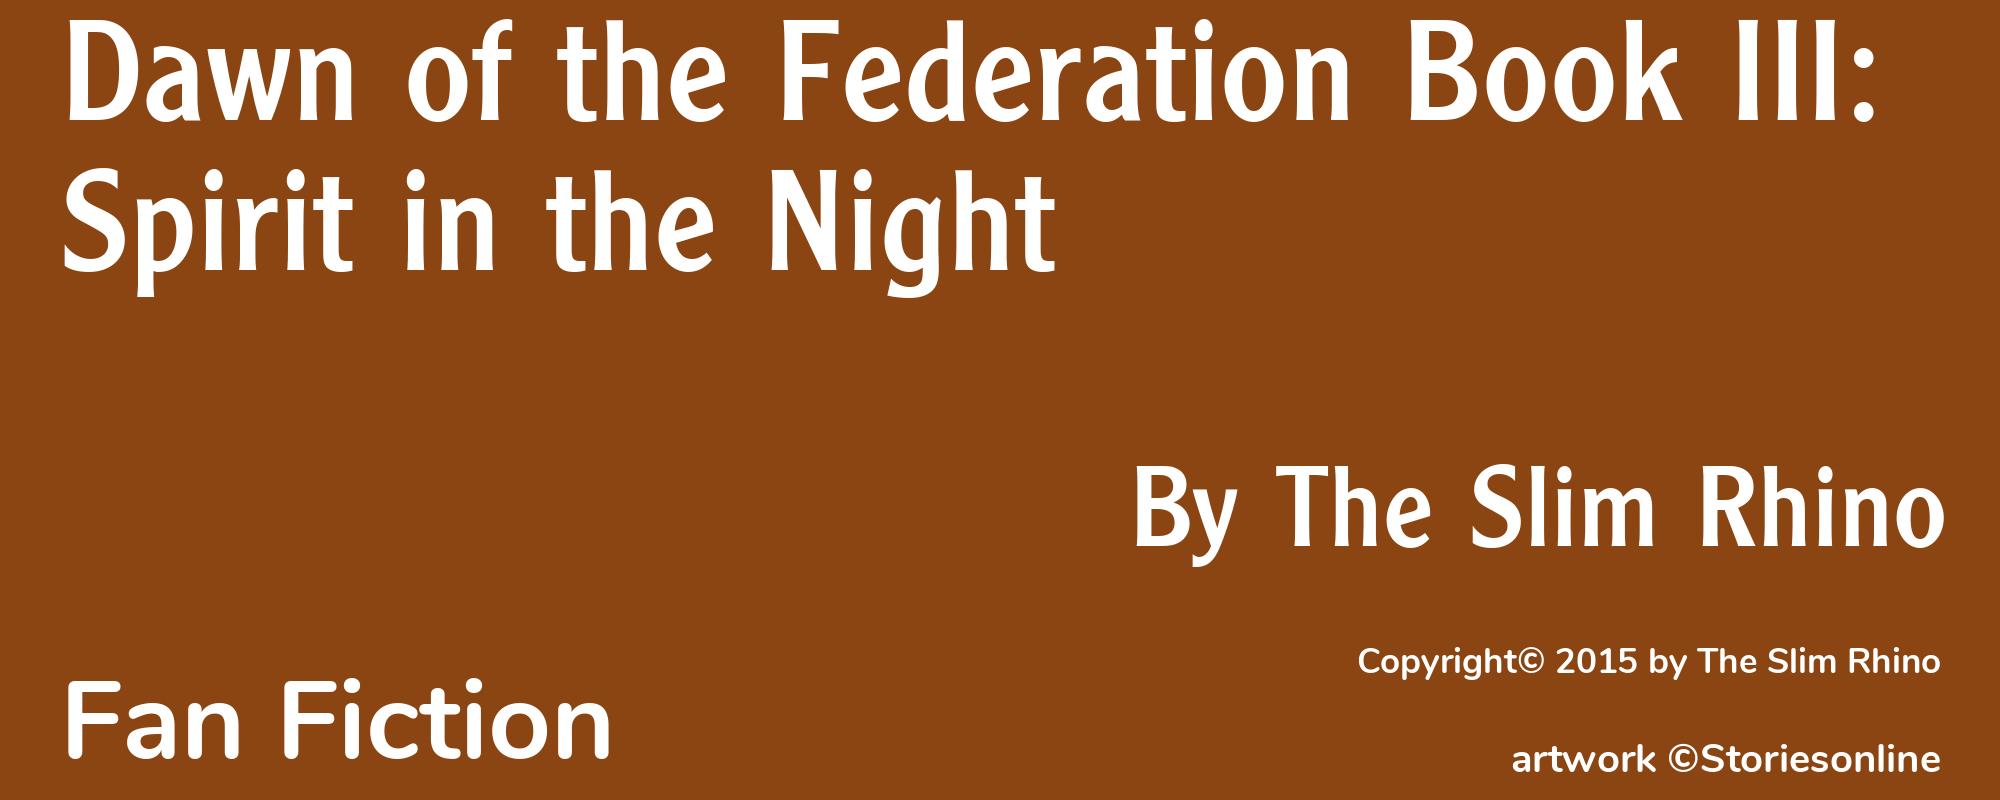 Dawn of the Federation Book III: Spirit in the Night - Cover